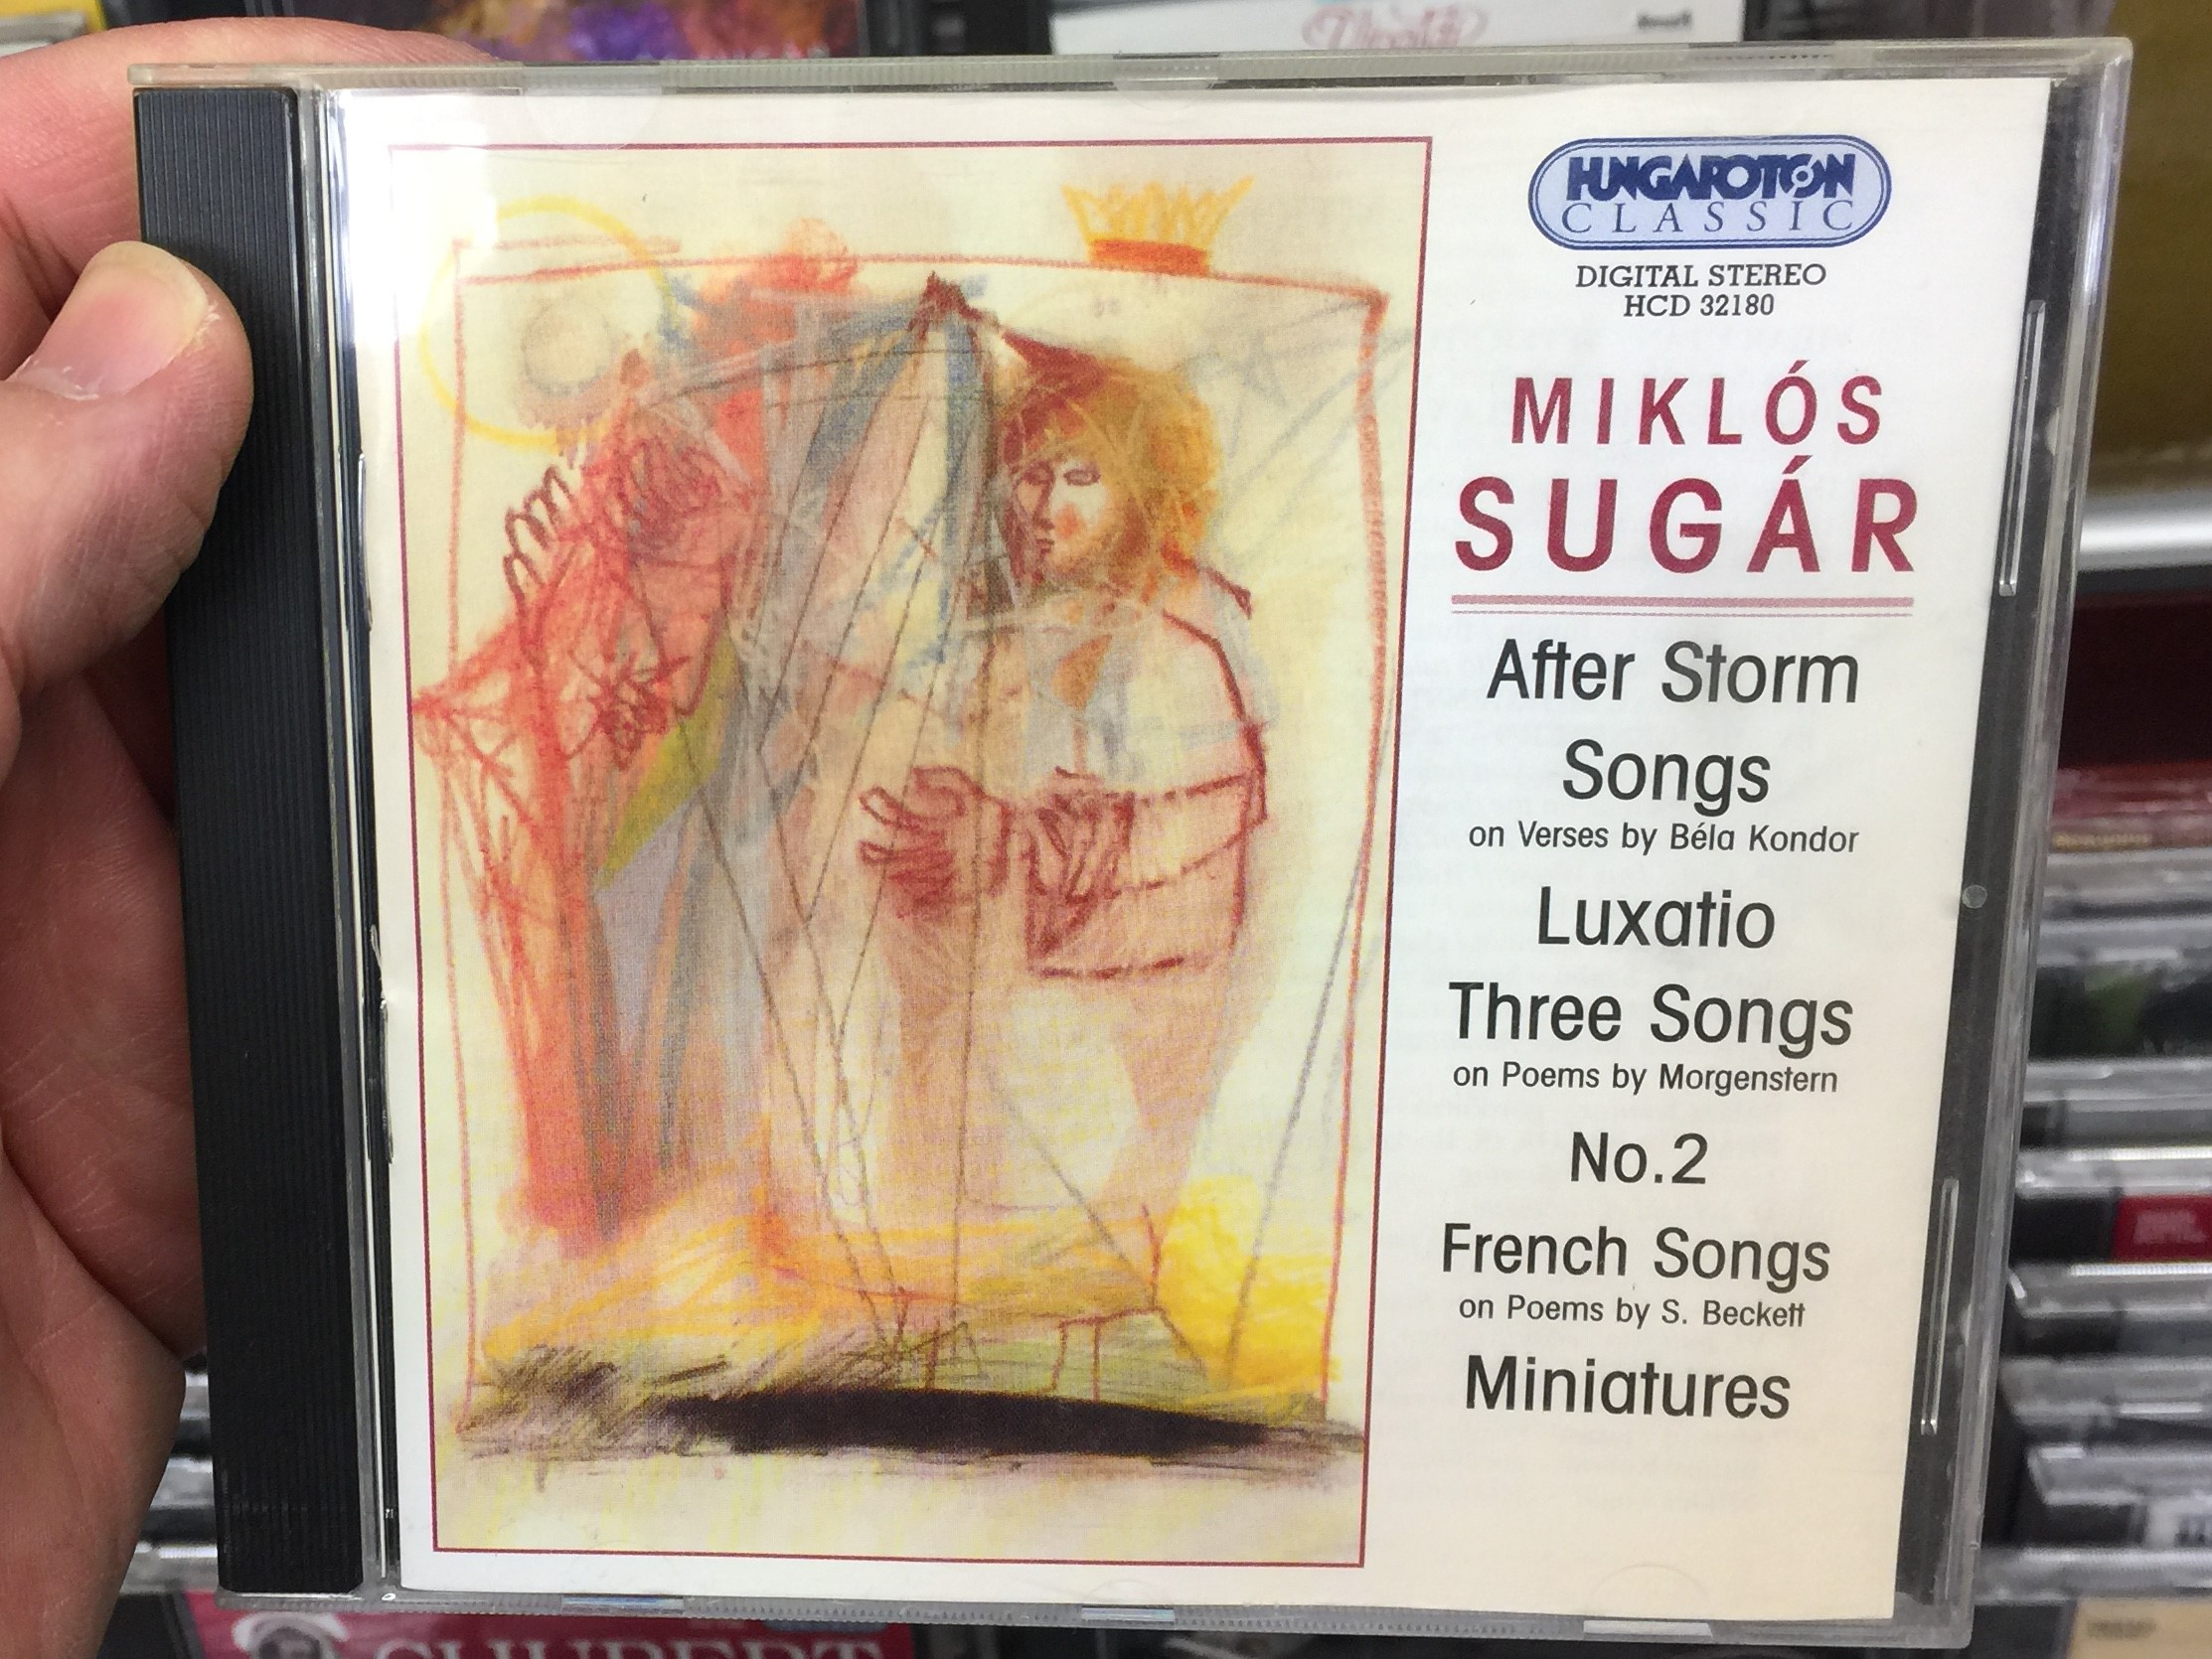 mikl-s-sug-r-after-storm-songs-on-verses-by-bela-kondor-luxatio-three-songs-on-poems-by-morgenstern-no.-2-french-songs-miniatures-hungaroton-classic-audio-cd-2003-stereo-hcd-32180-1-.jpg